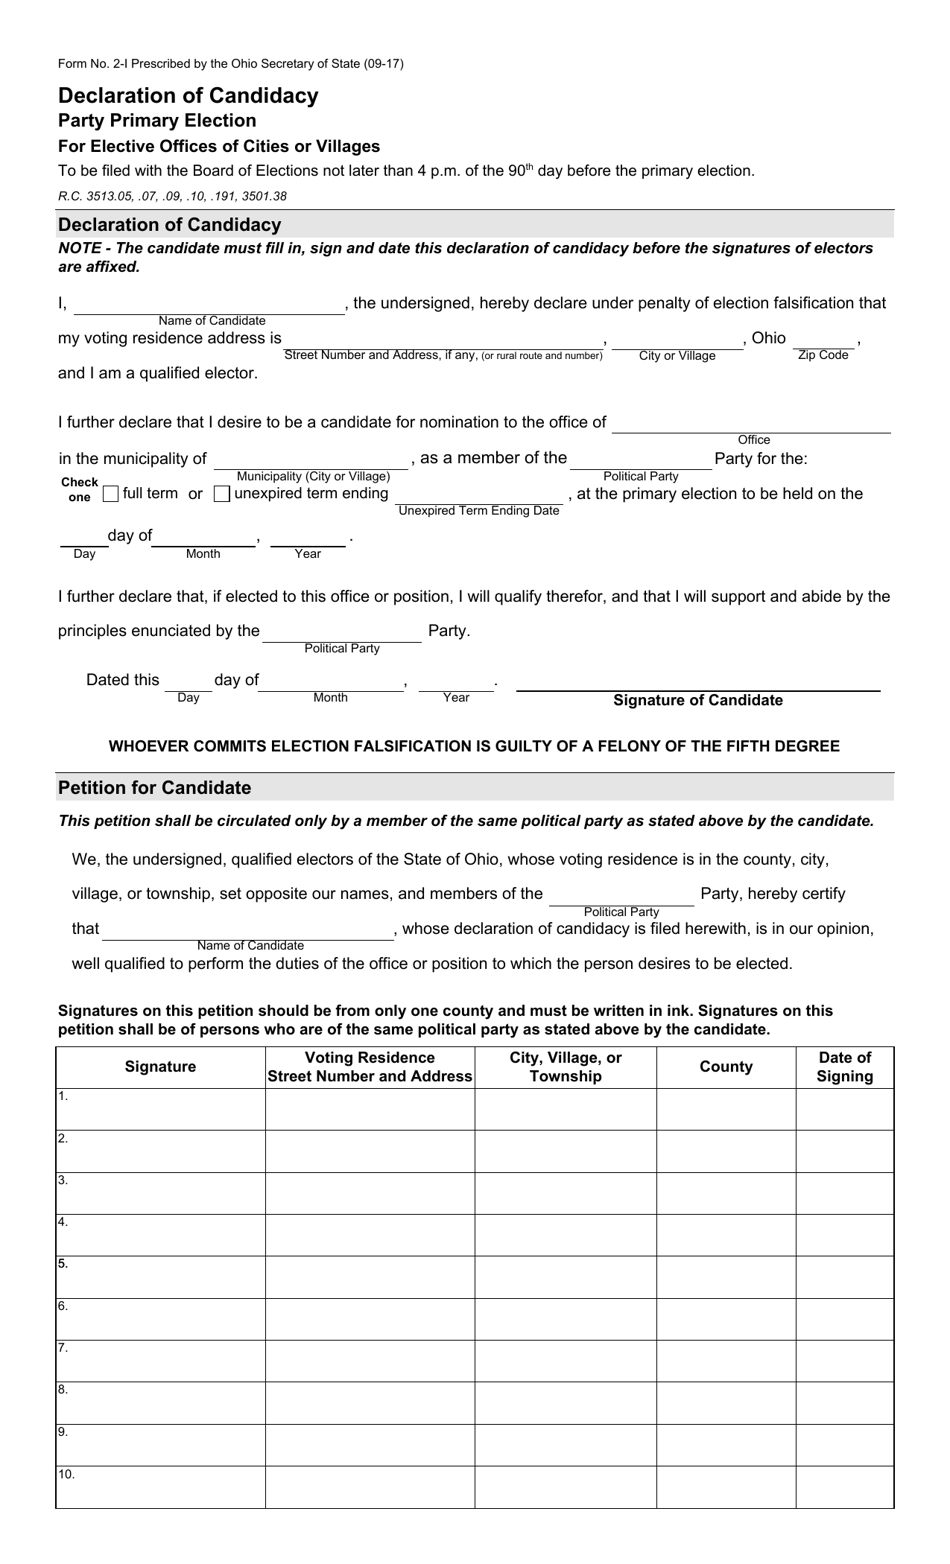 Form 2-I Declaration of Candidacy - Party Primary Election for Elective Offices of Cities or Villages - Ohio, Page 1